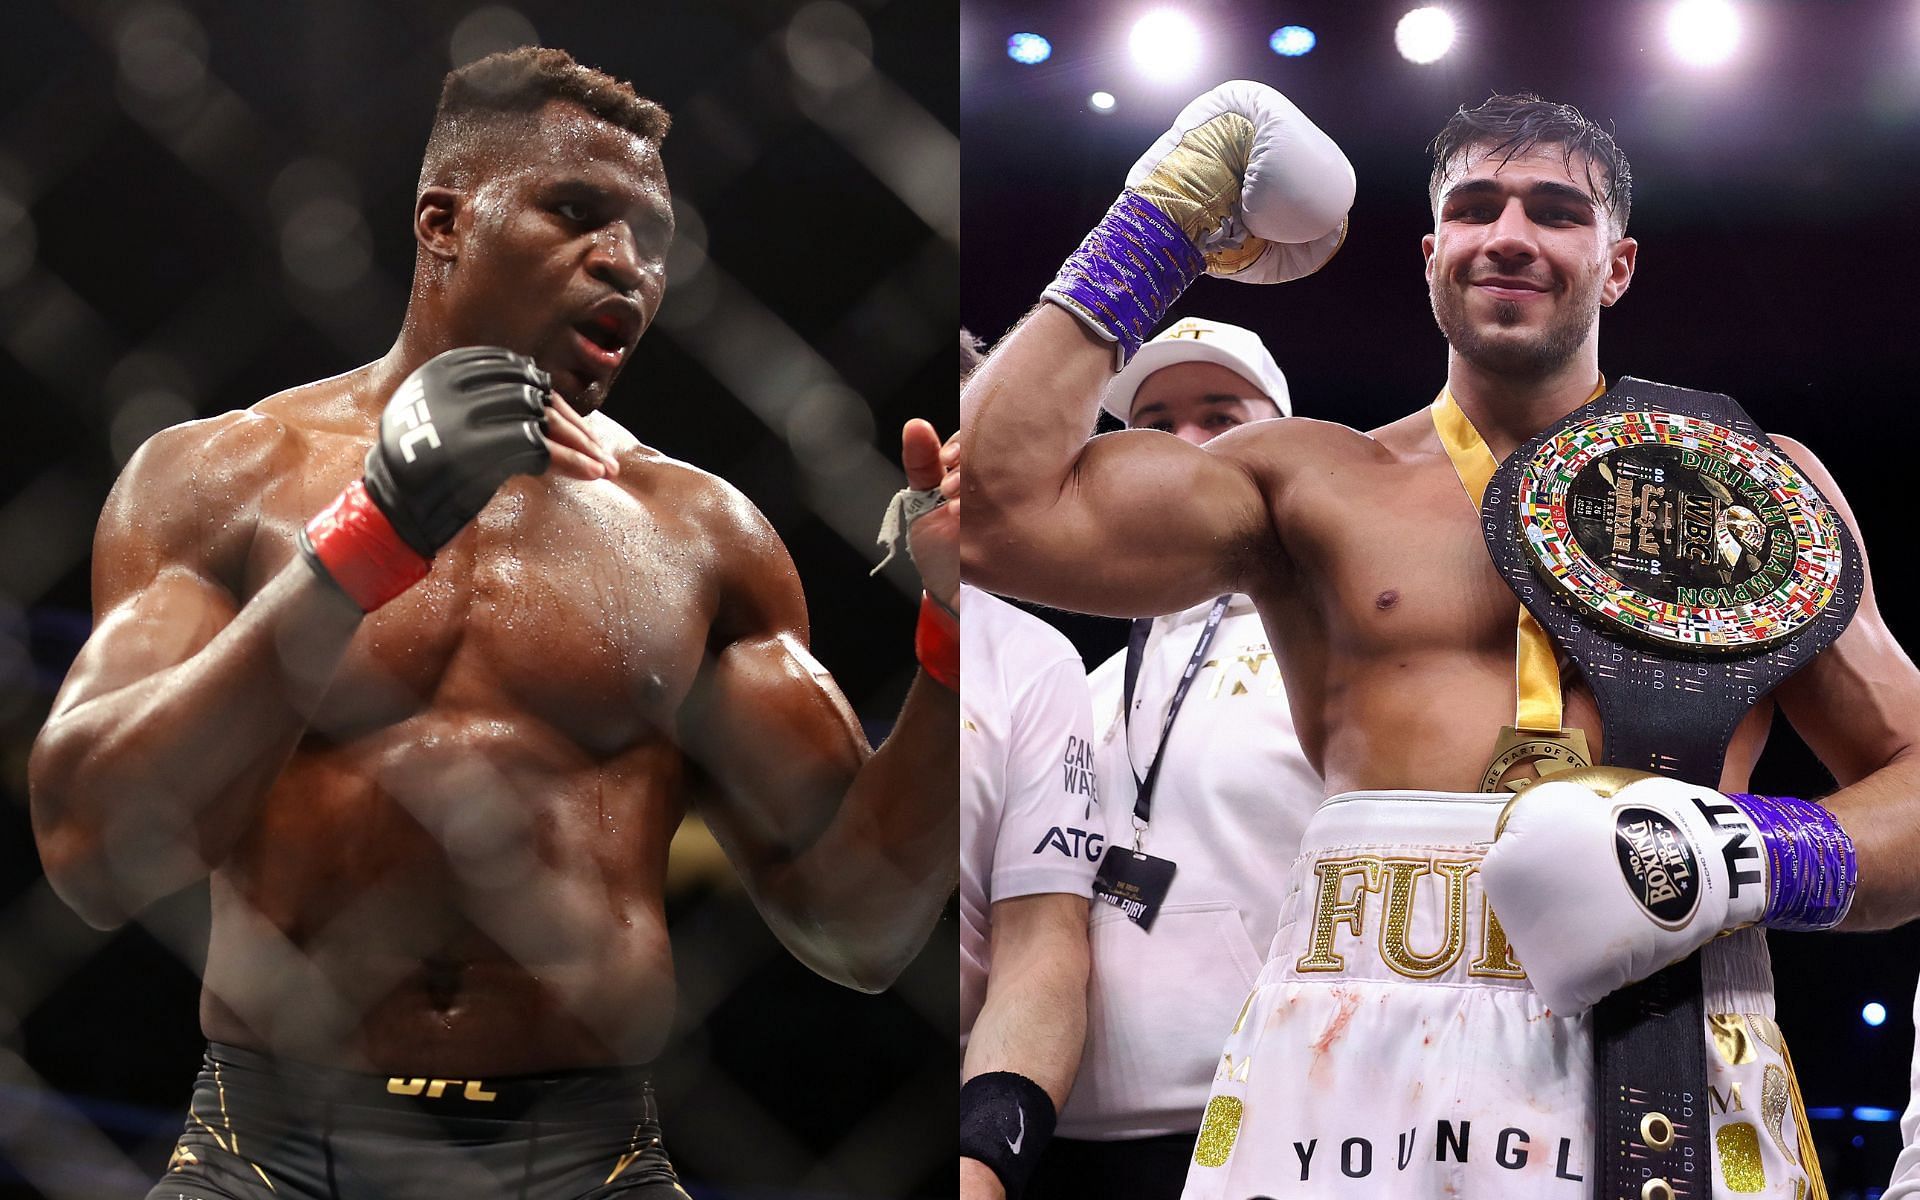 Tommy Fury (left) and Francis Ngannou (right) (Image credits Getty Images)